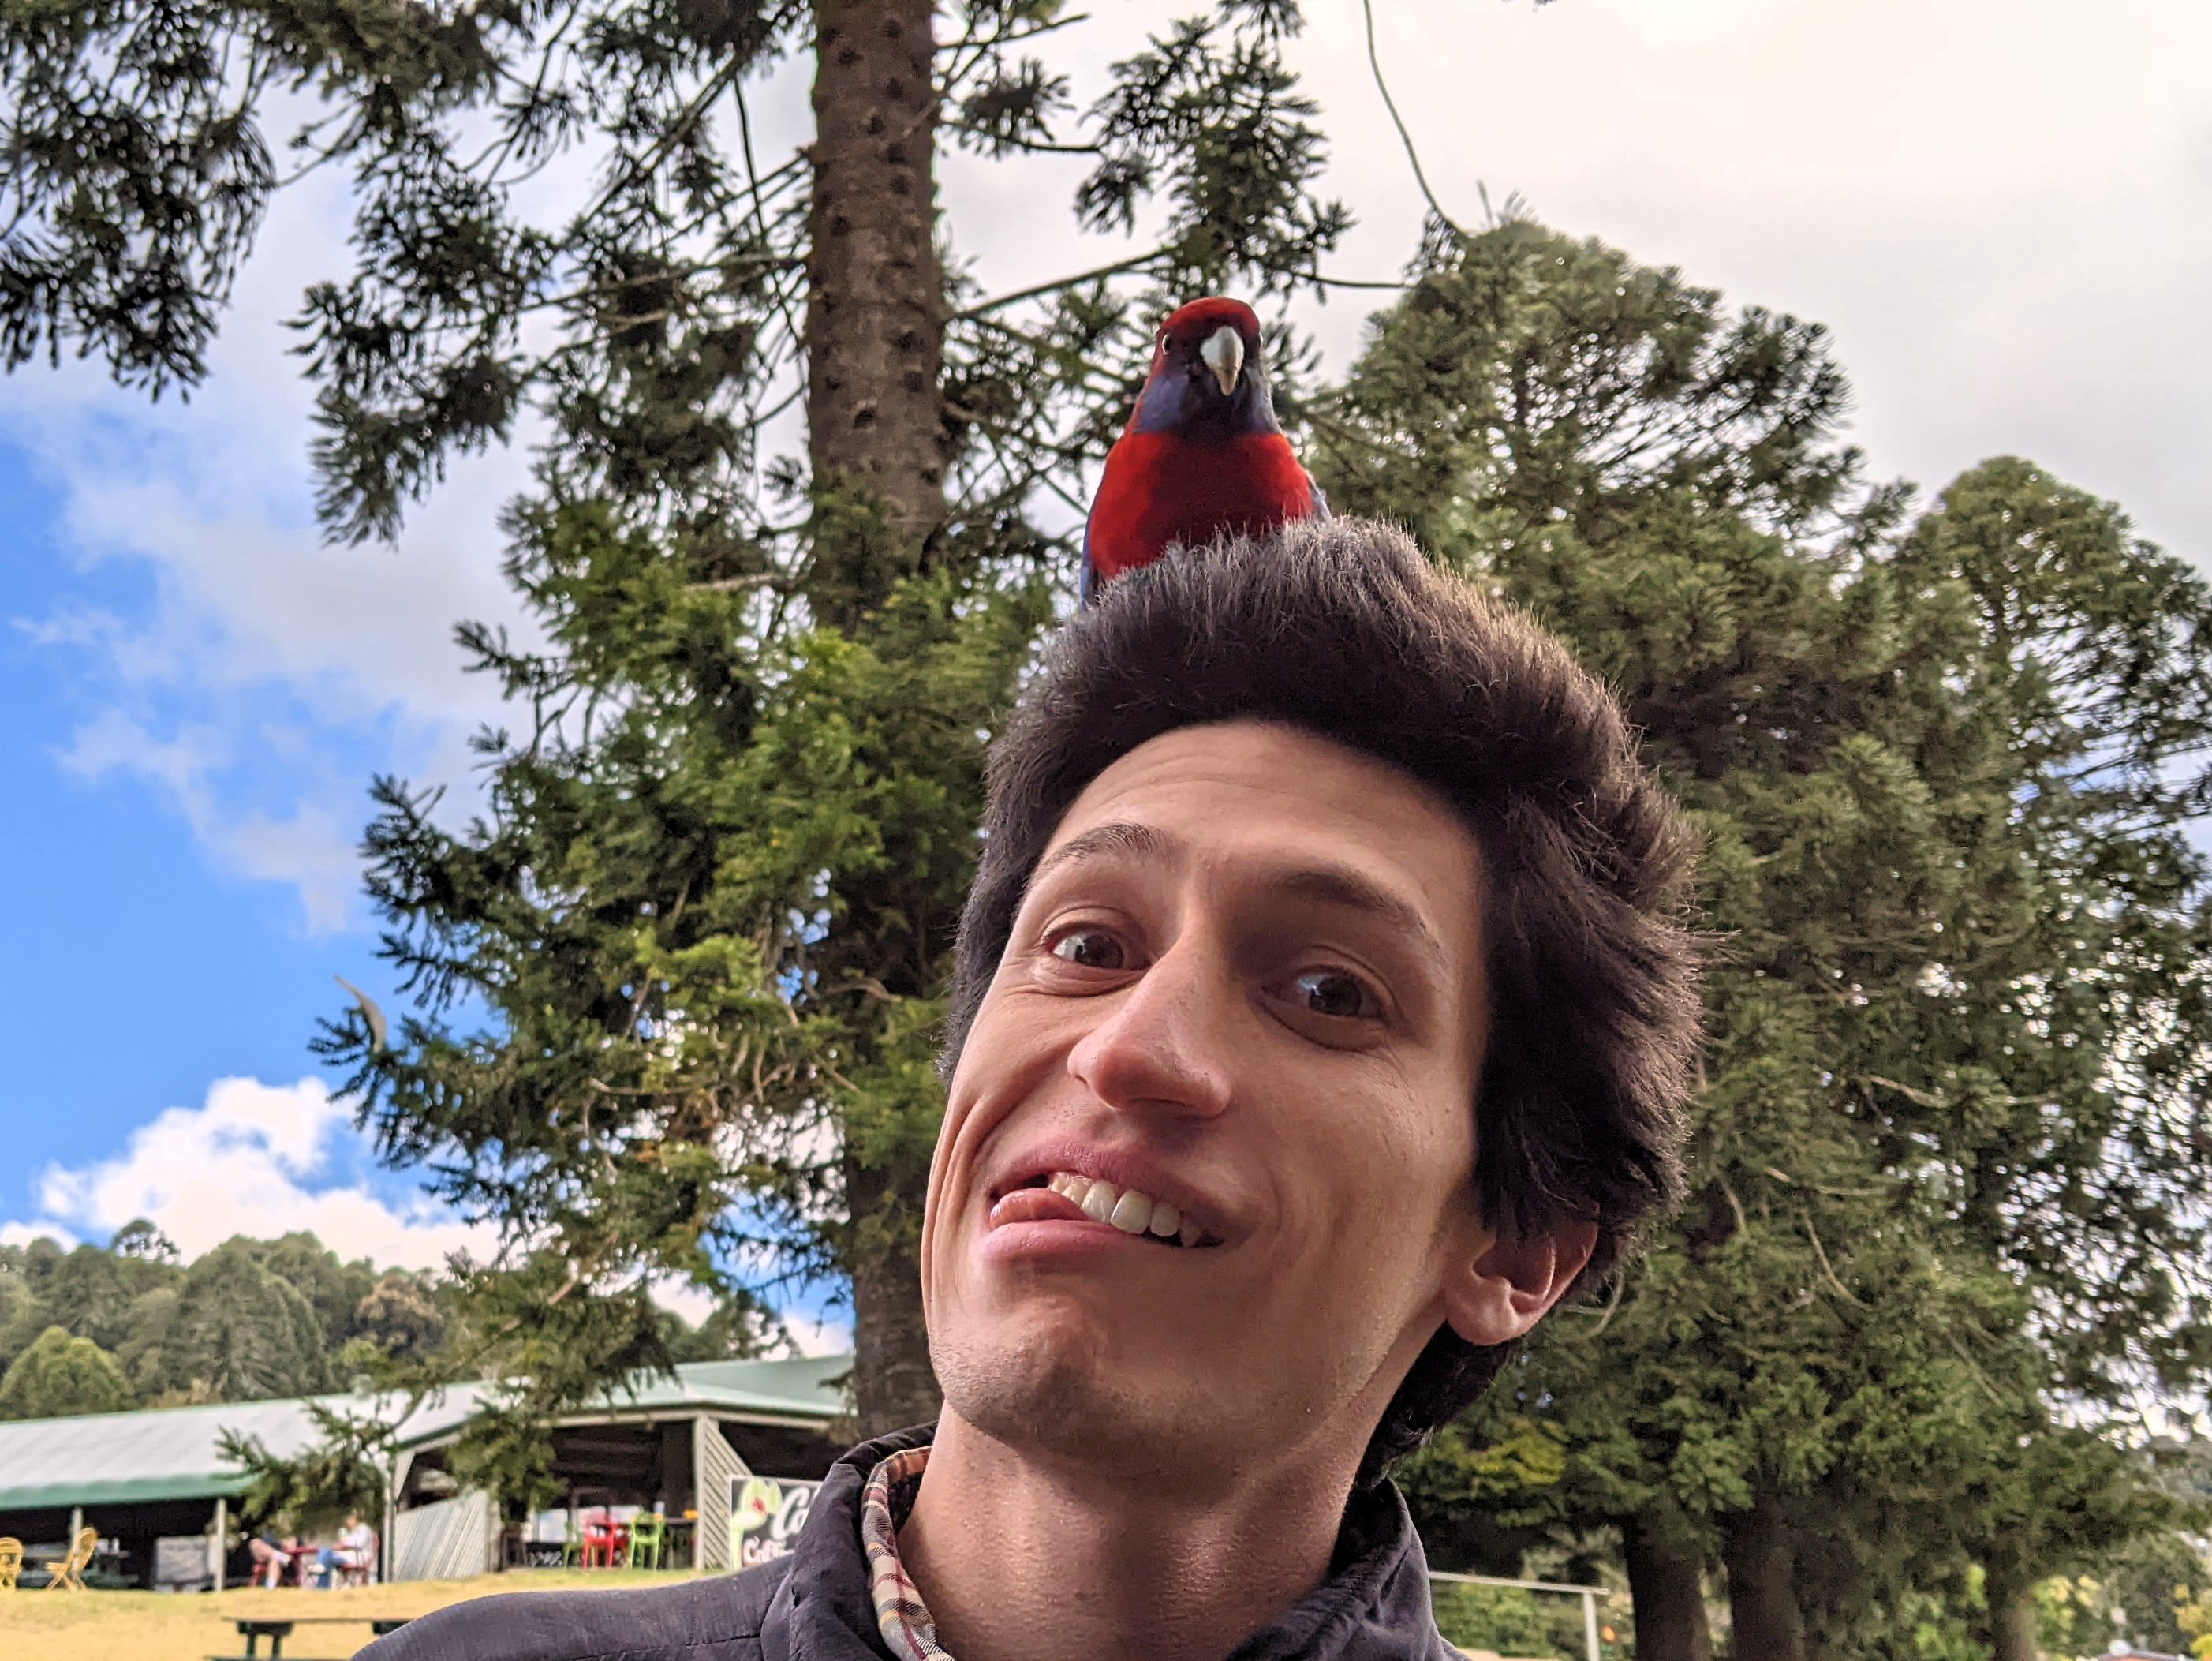 Me with a parrot (crimson rosella) on my head